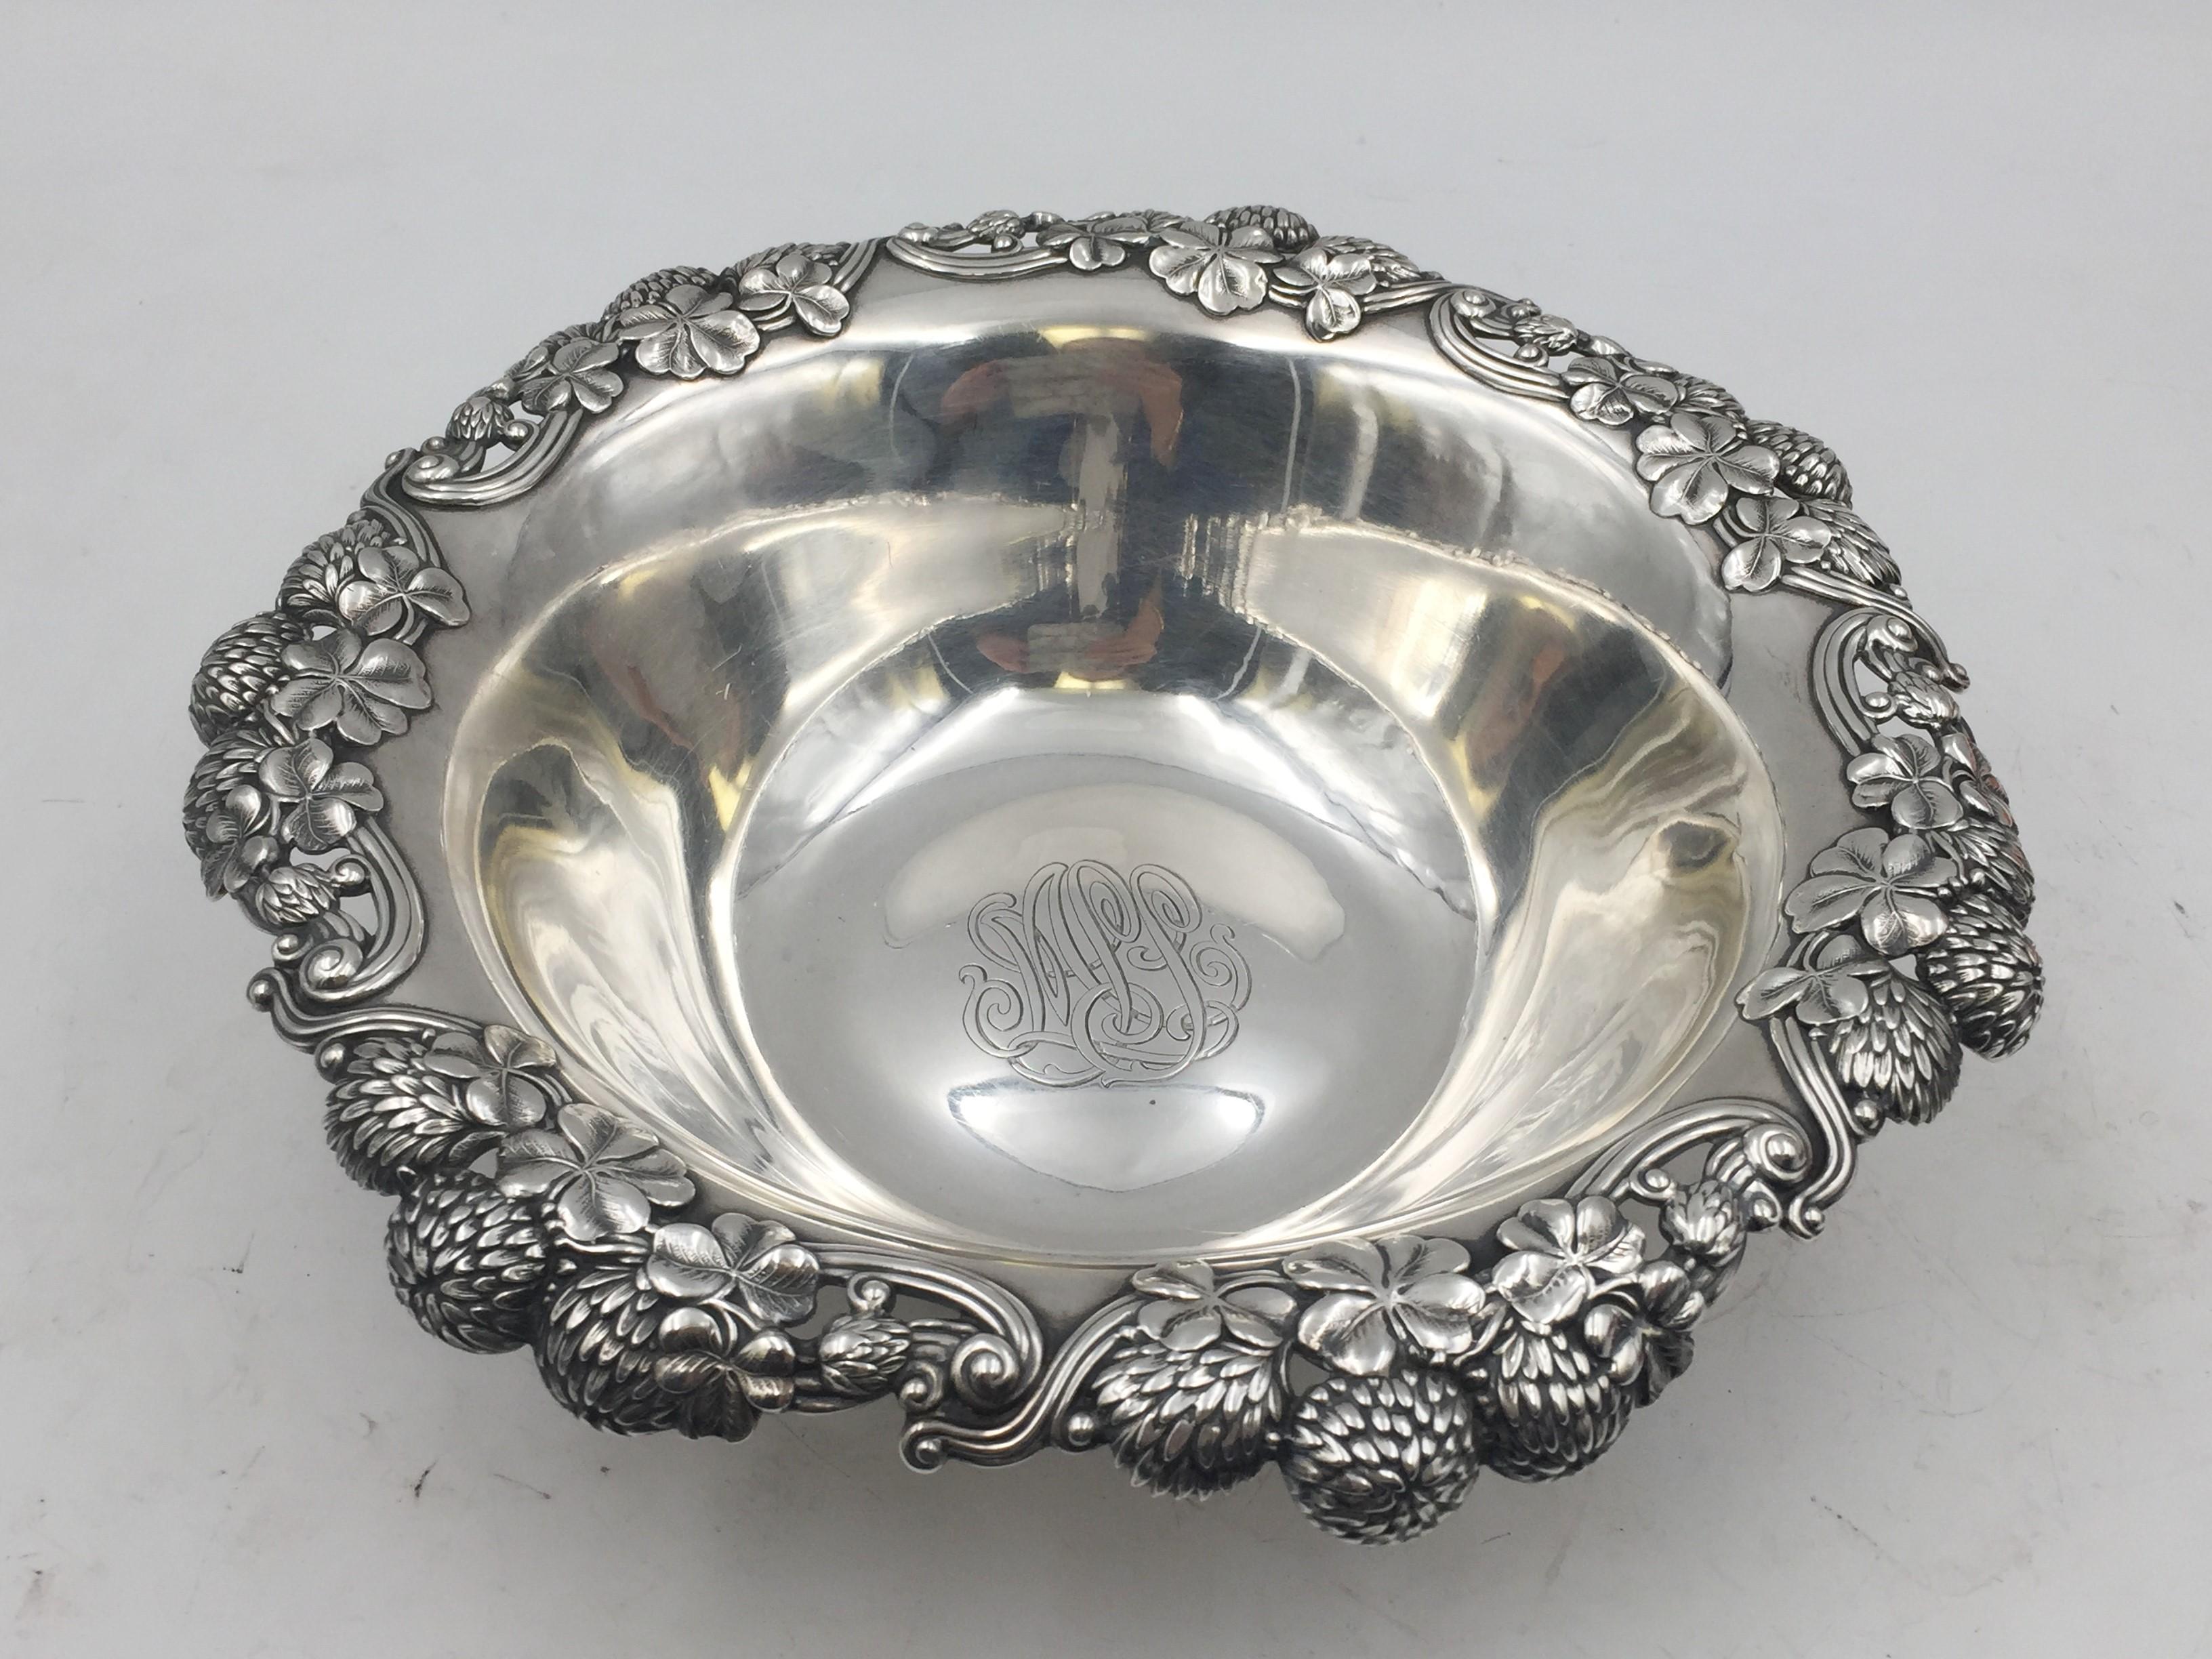 American Tiffany & Co. 1898 Sterling Silver Clover Berry Bowl in Art Nouveau Style